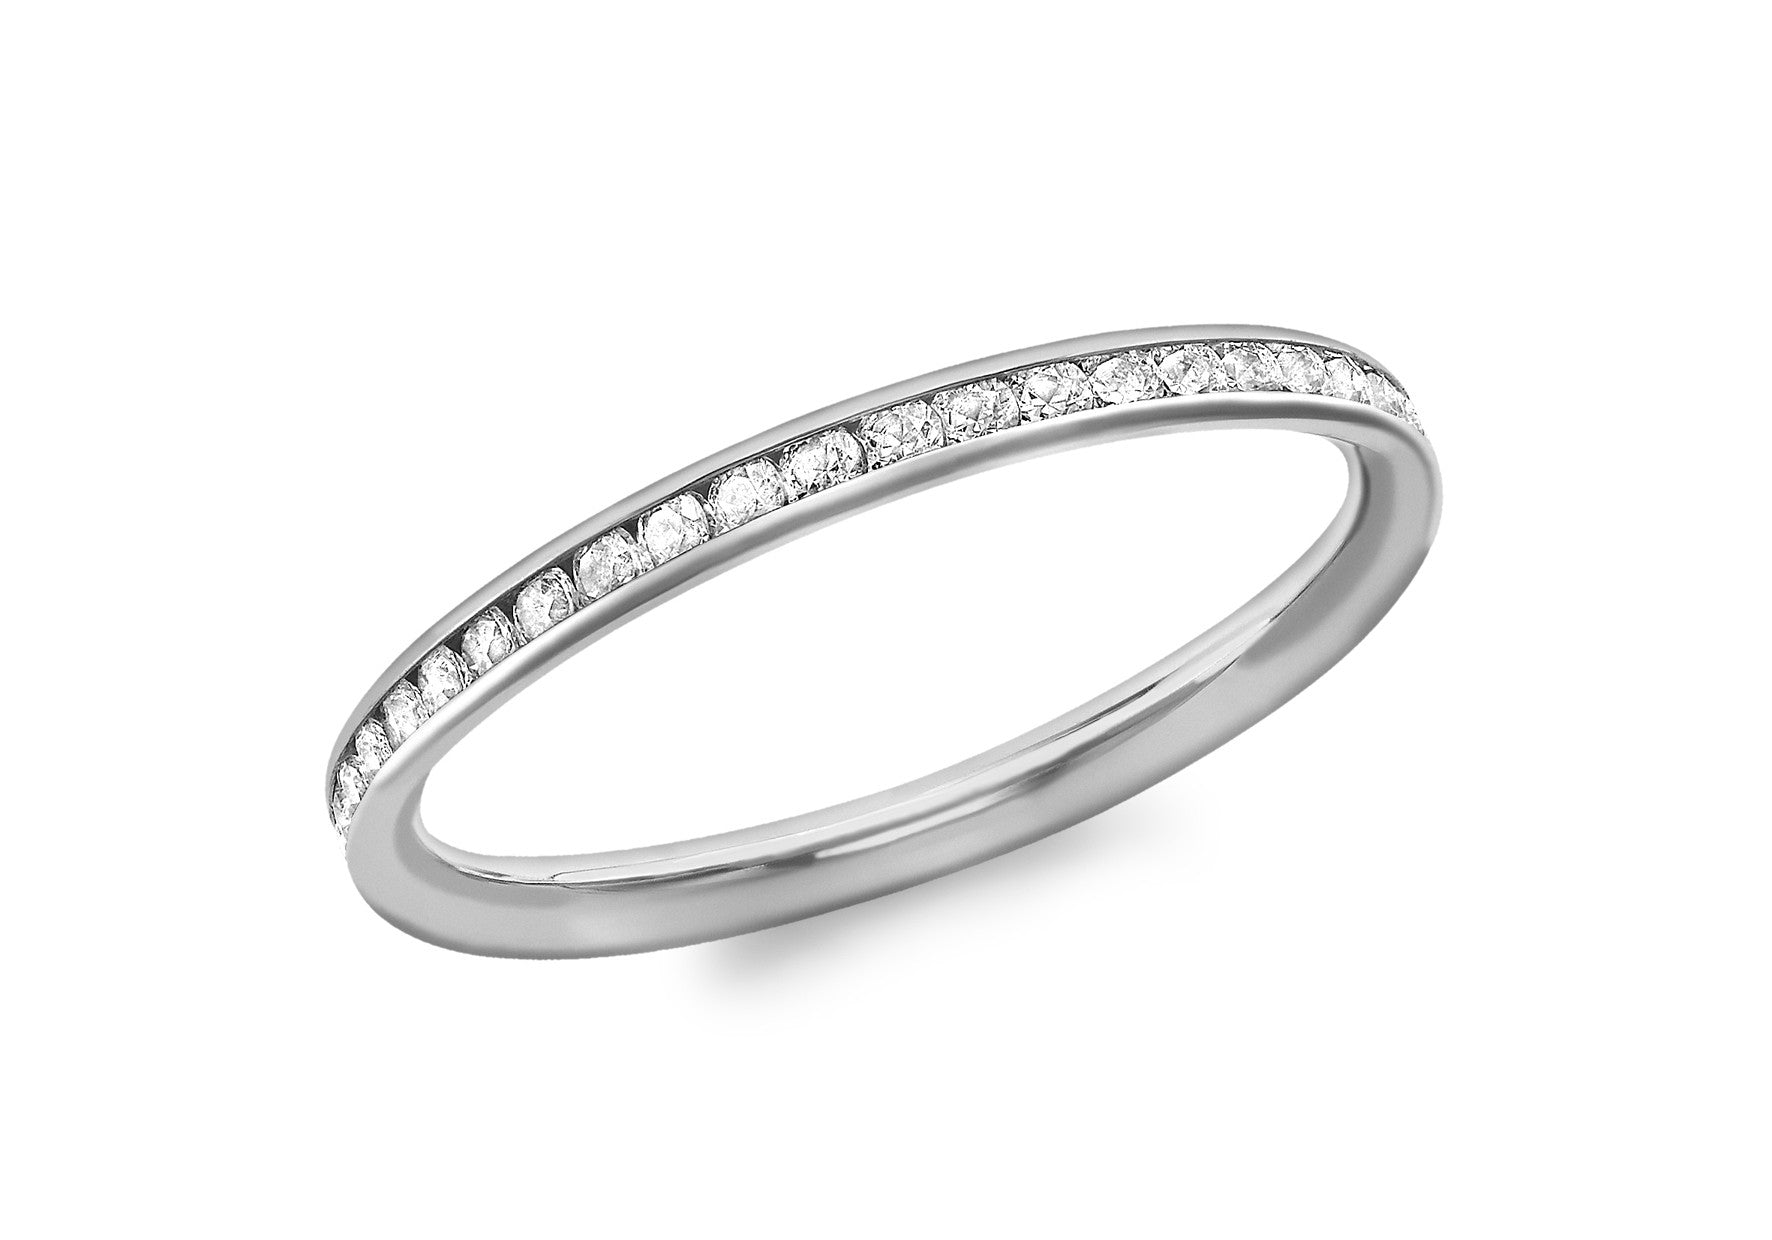 9ct White Gold Channel Set Cubic Zirconia Ring